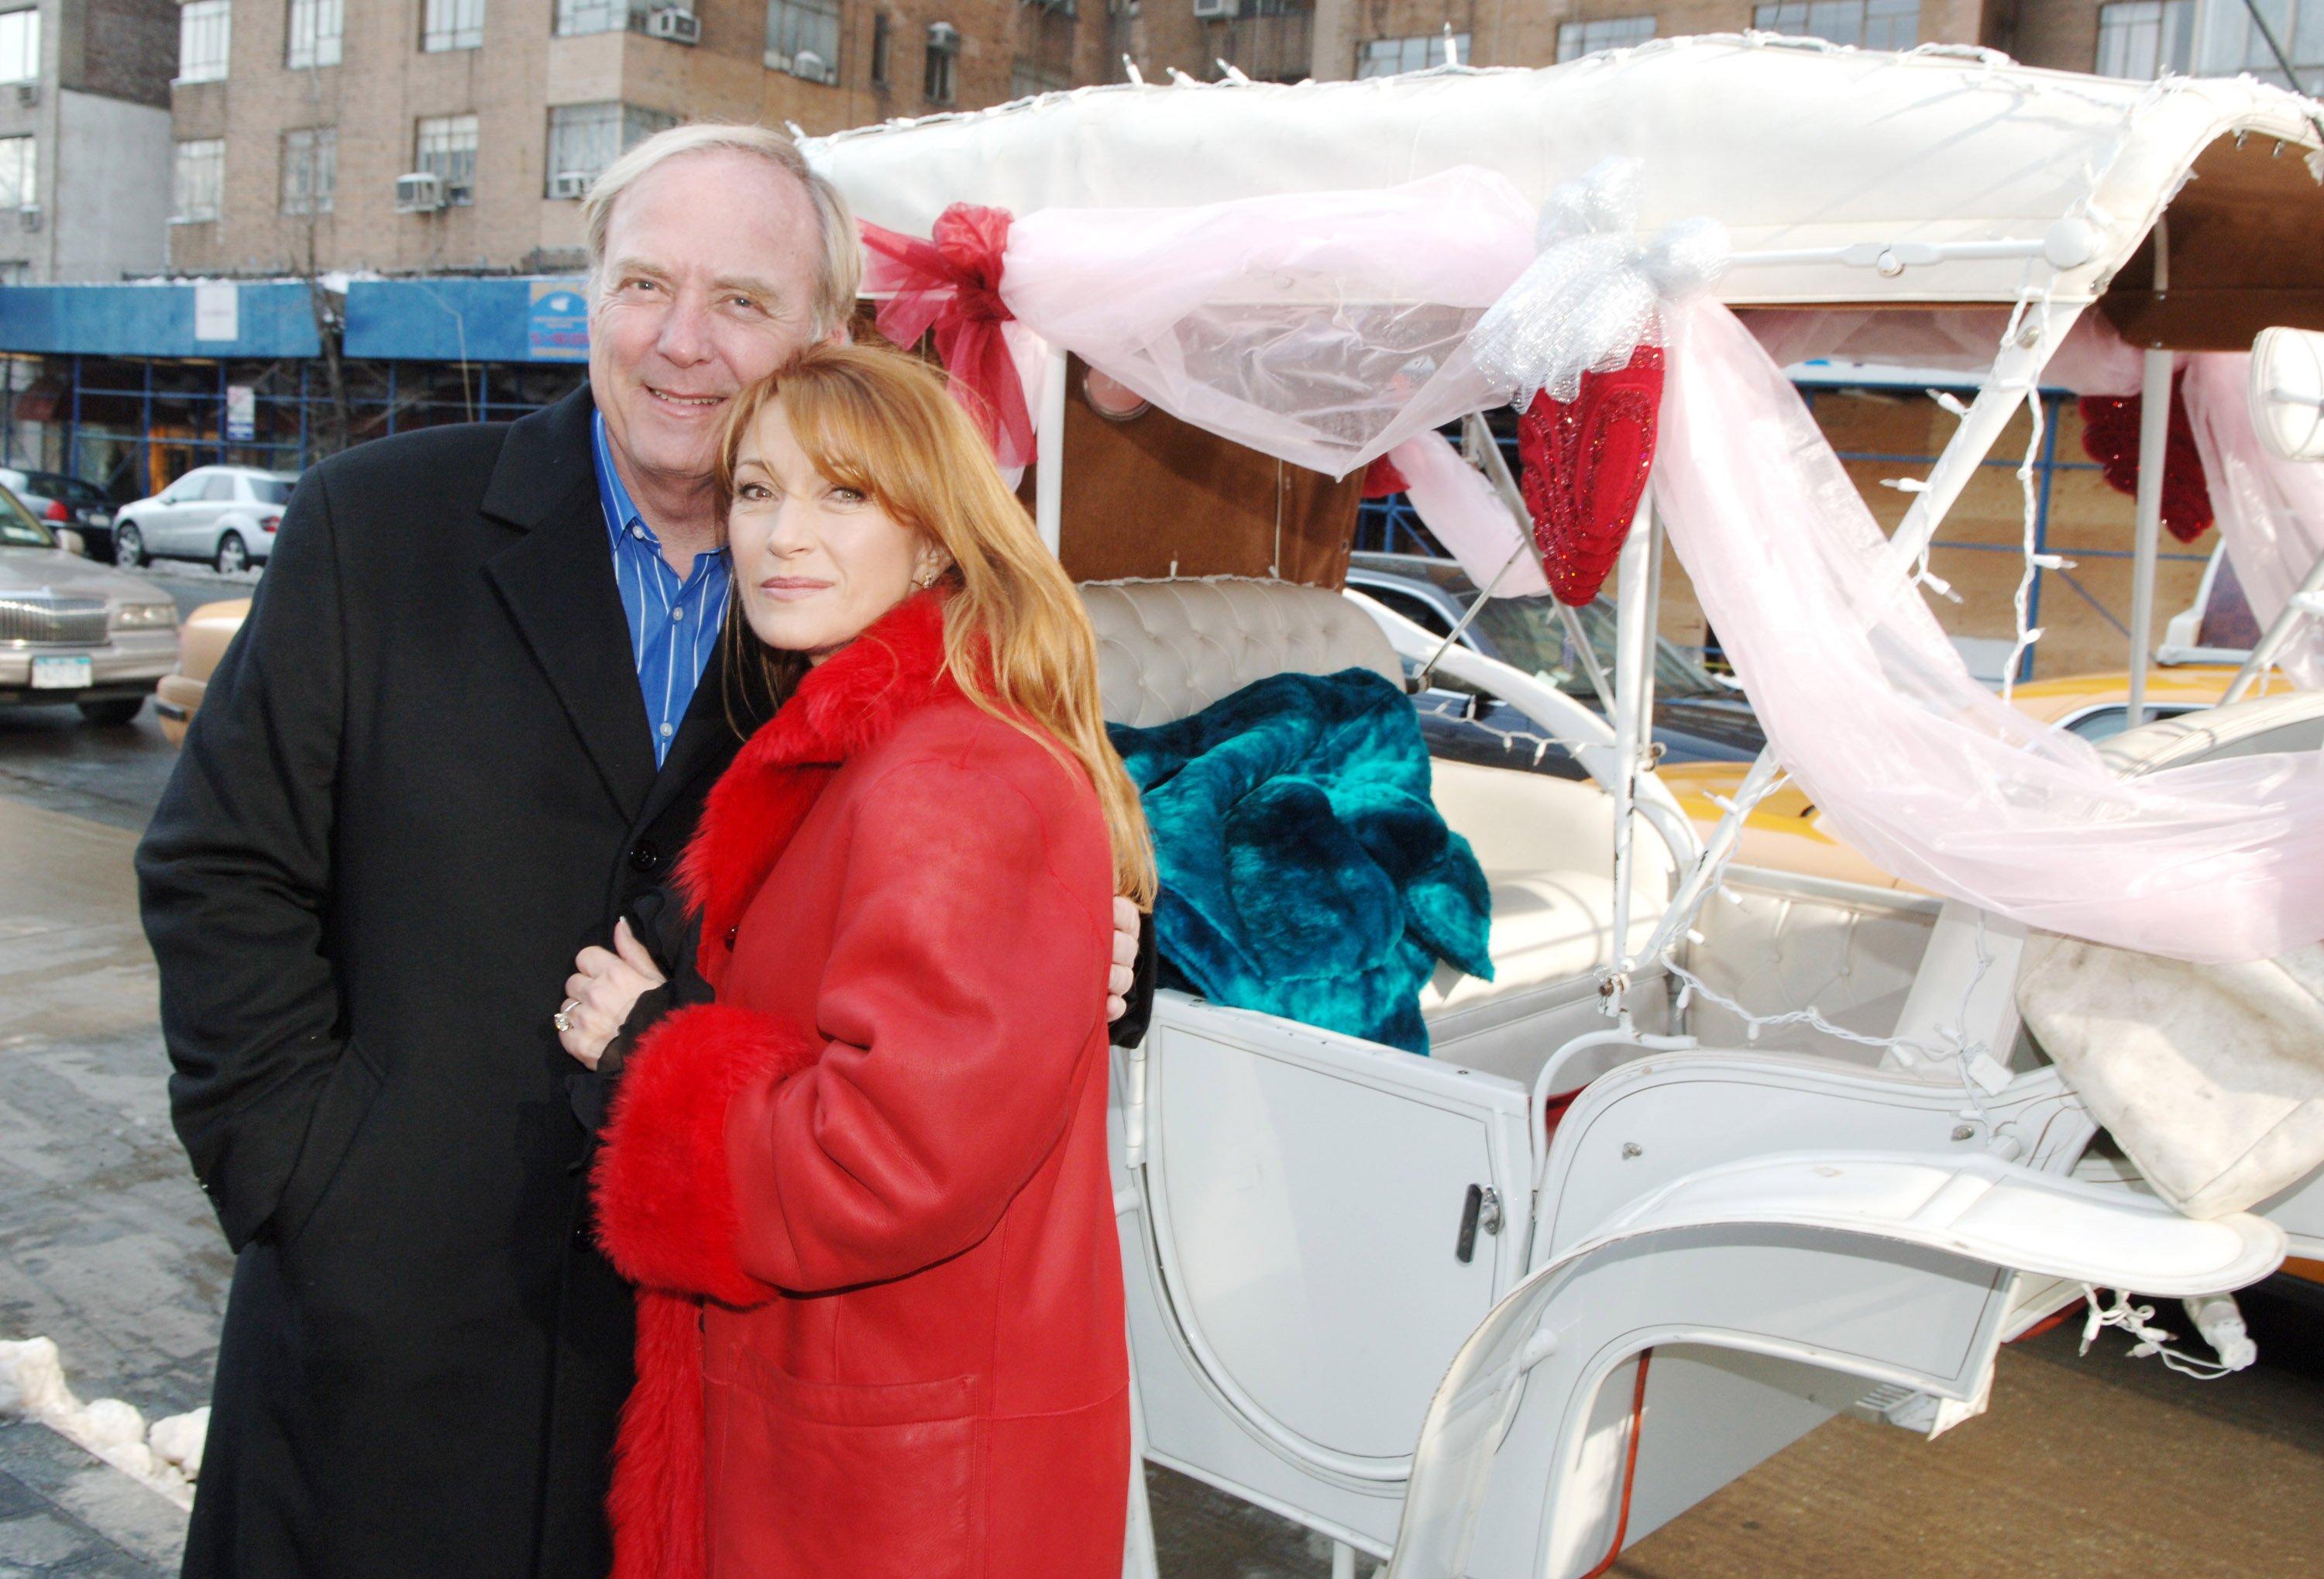  Jane Seymour and James Keach Take First Carriage Ride on Valentine's Day to Benefit Breast Cancer Research and Announce Winner of World's Best Love Letter at Columus Circle - Central Park in New York City, February 14, 2006 | Photo: Getty Images